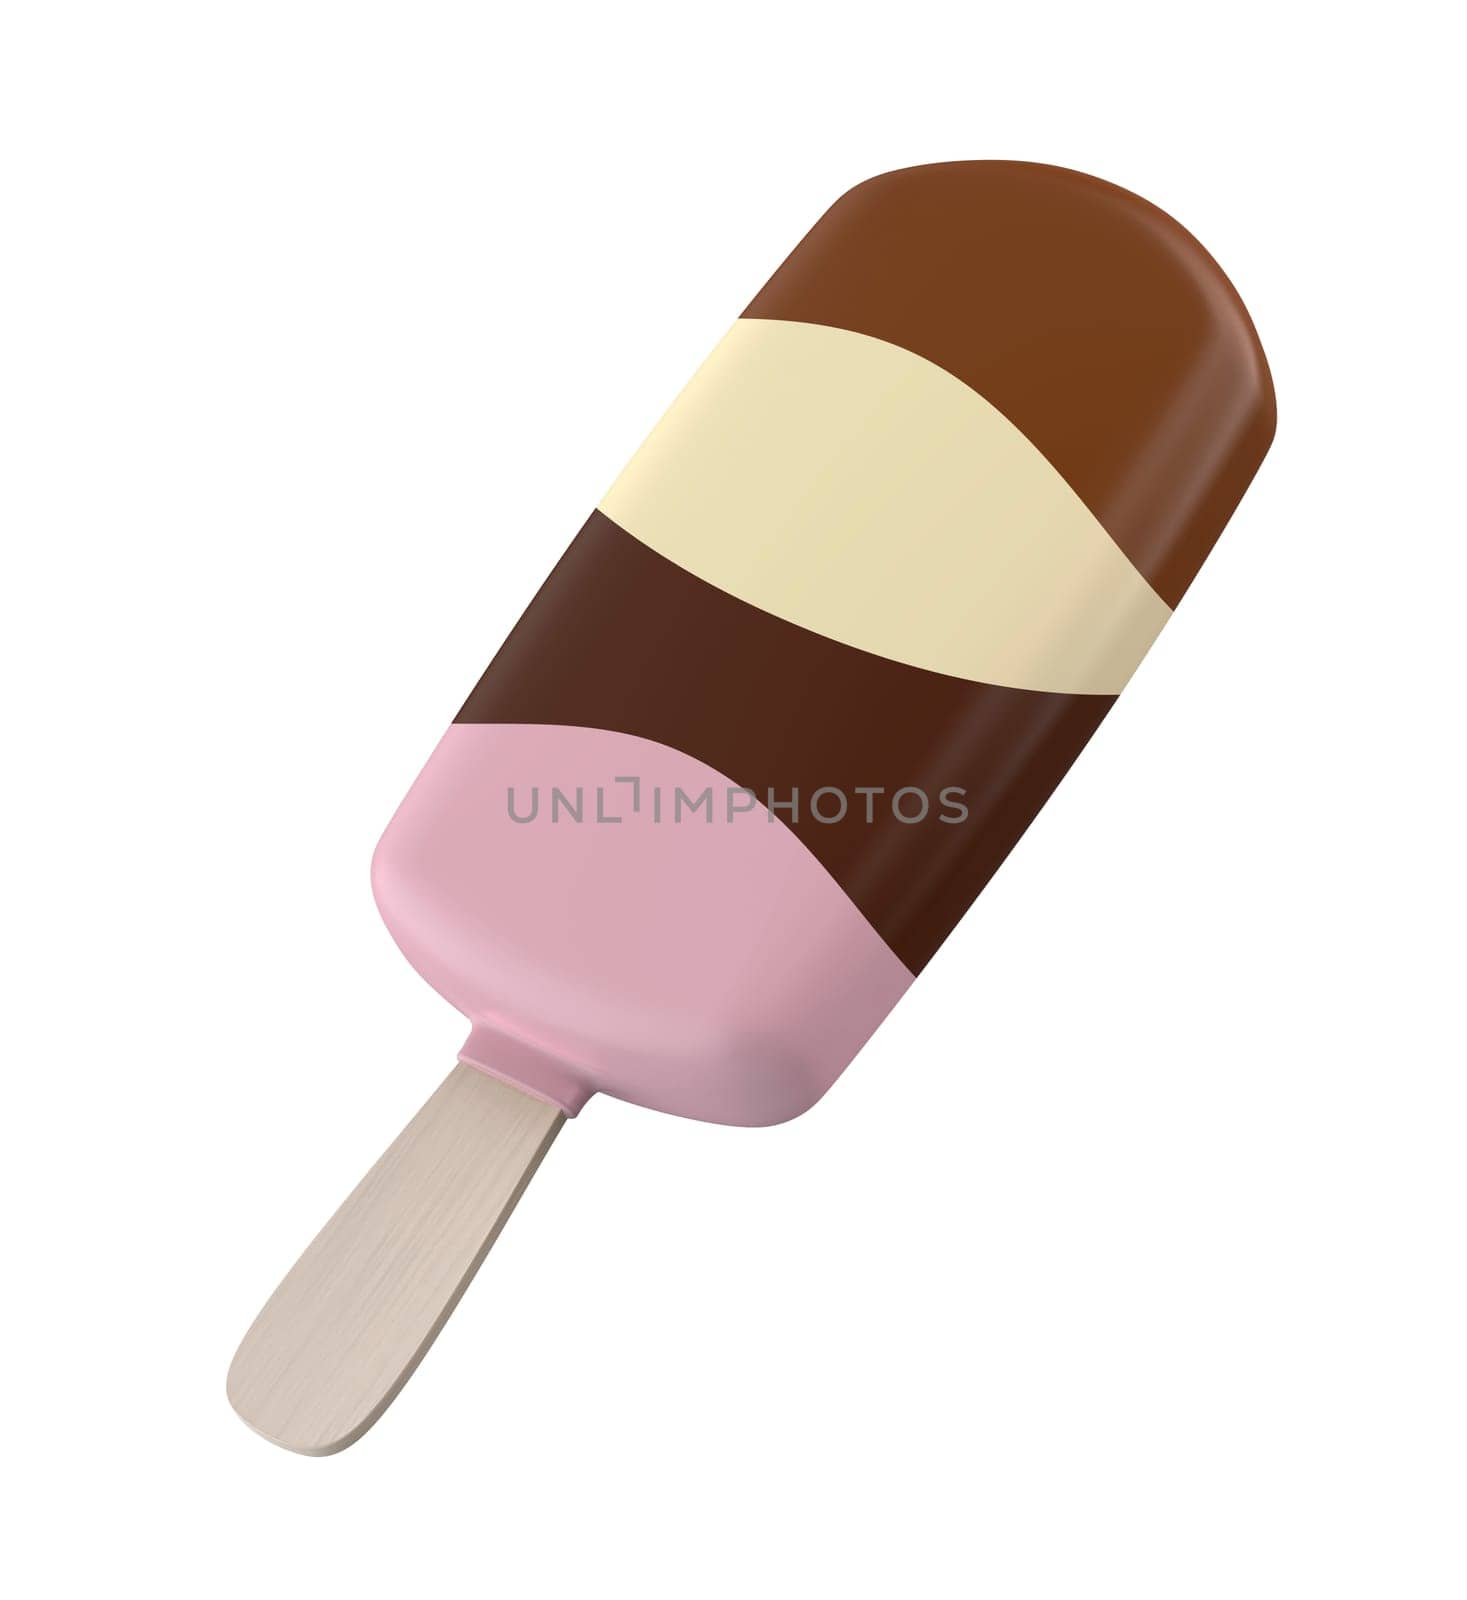 Ice cream coated with four different chocolates by magraphics